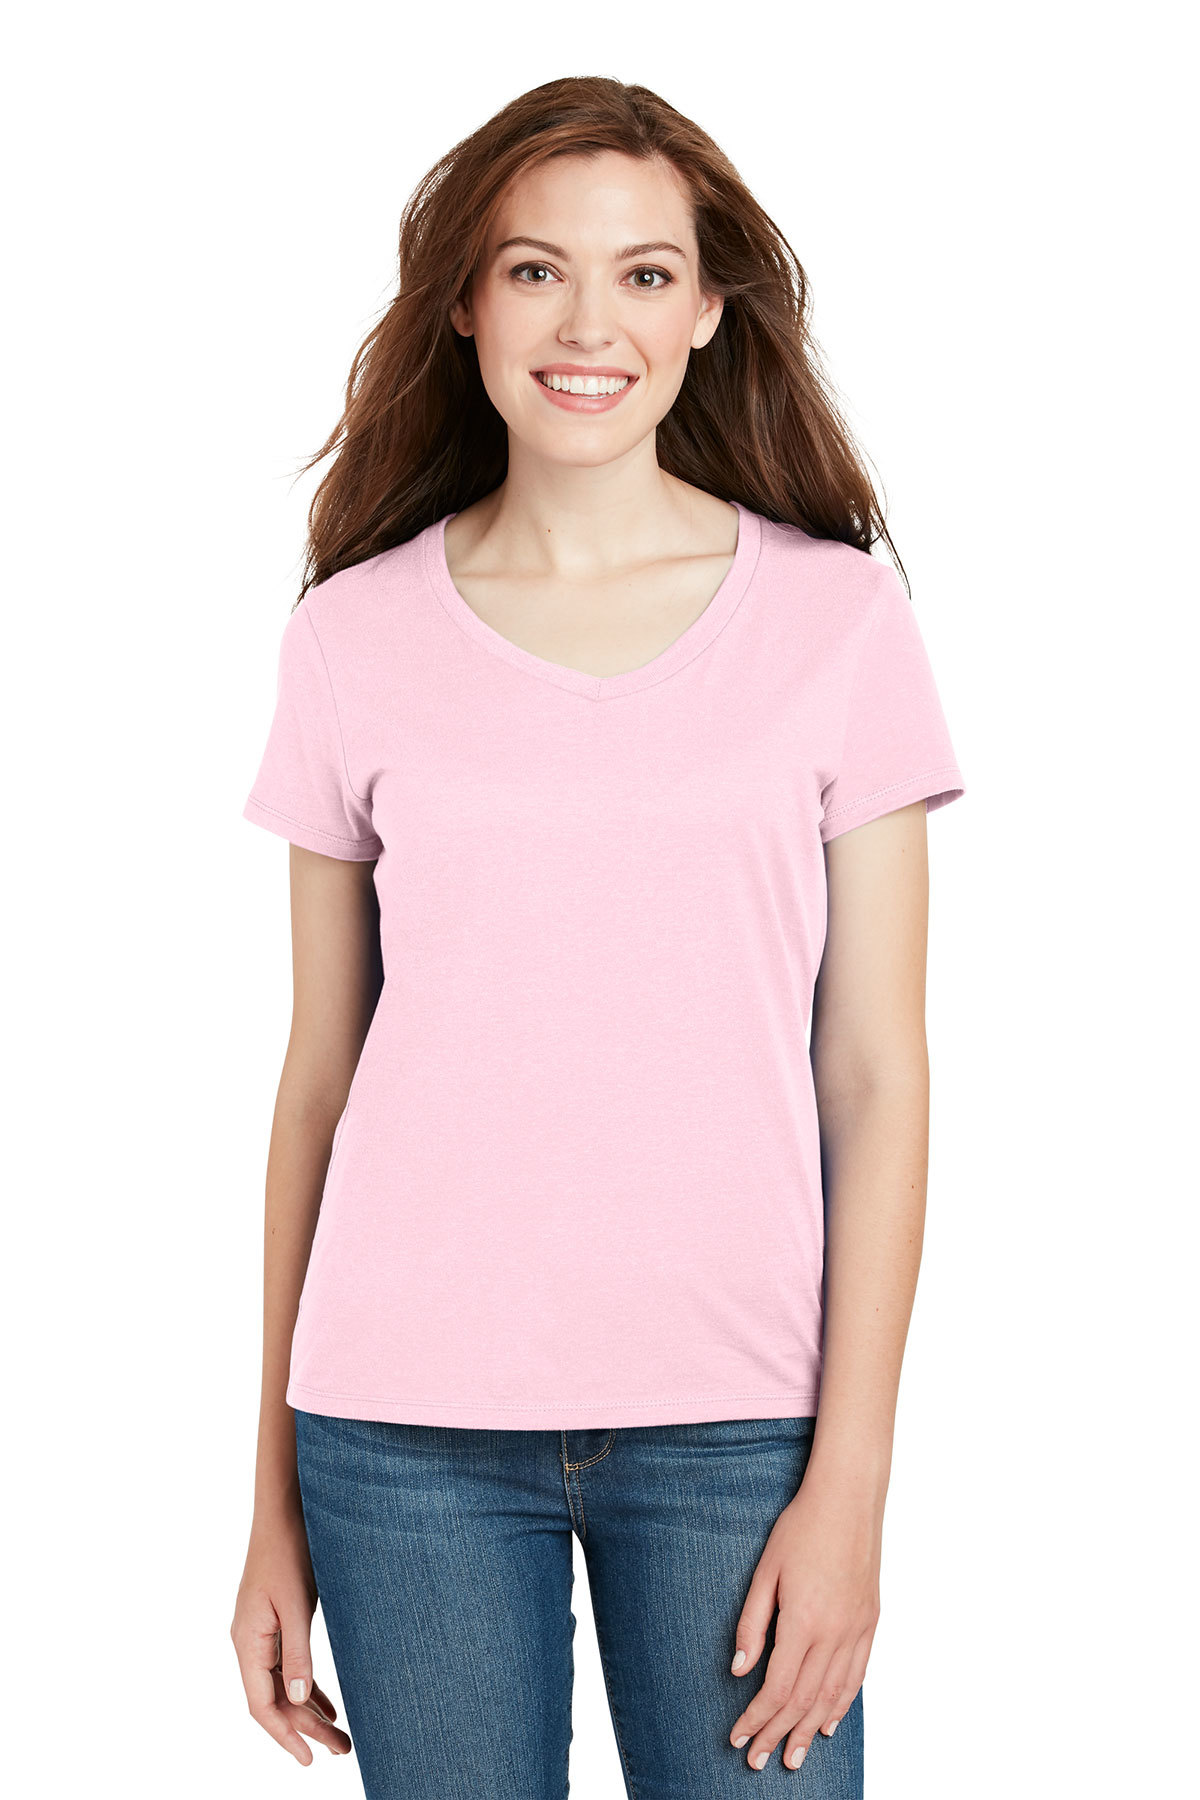 Hanes Ladies Perfect-T Cotton V-Neck T-Shirt | Product Company